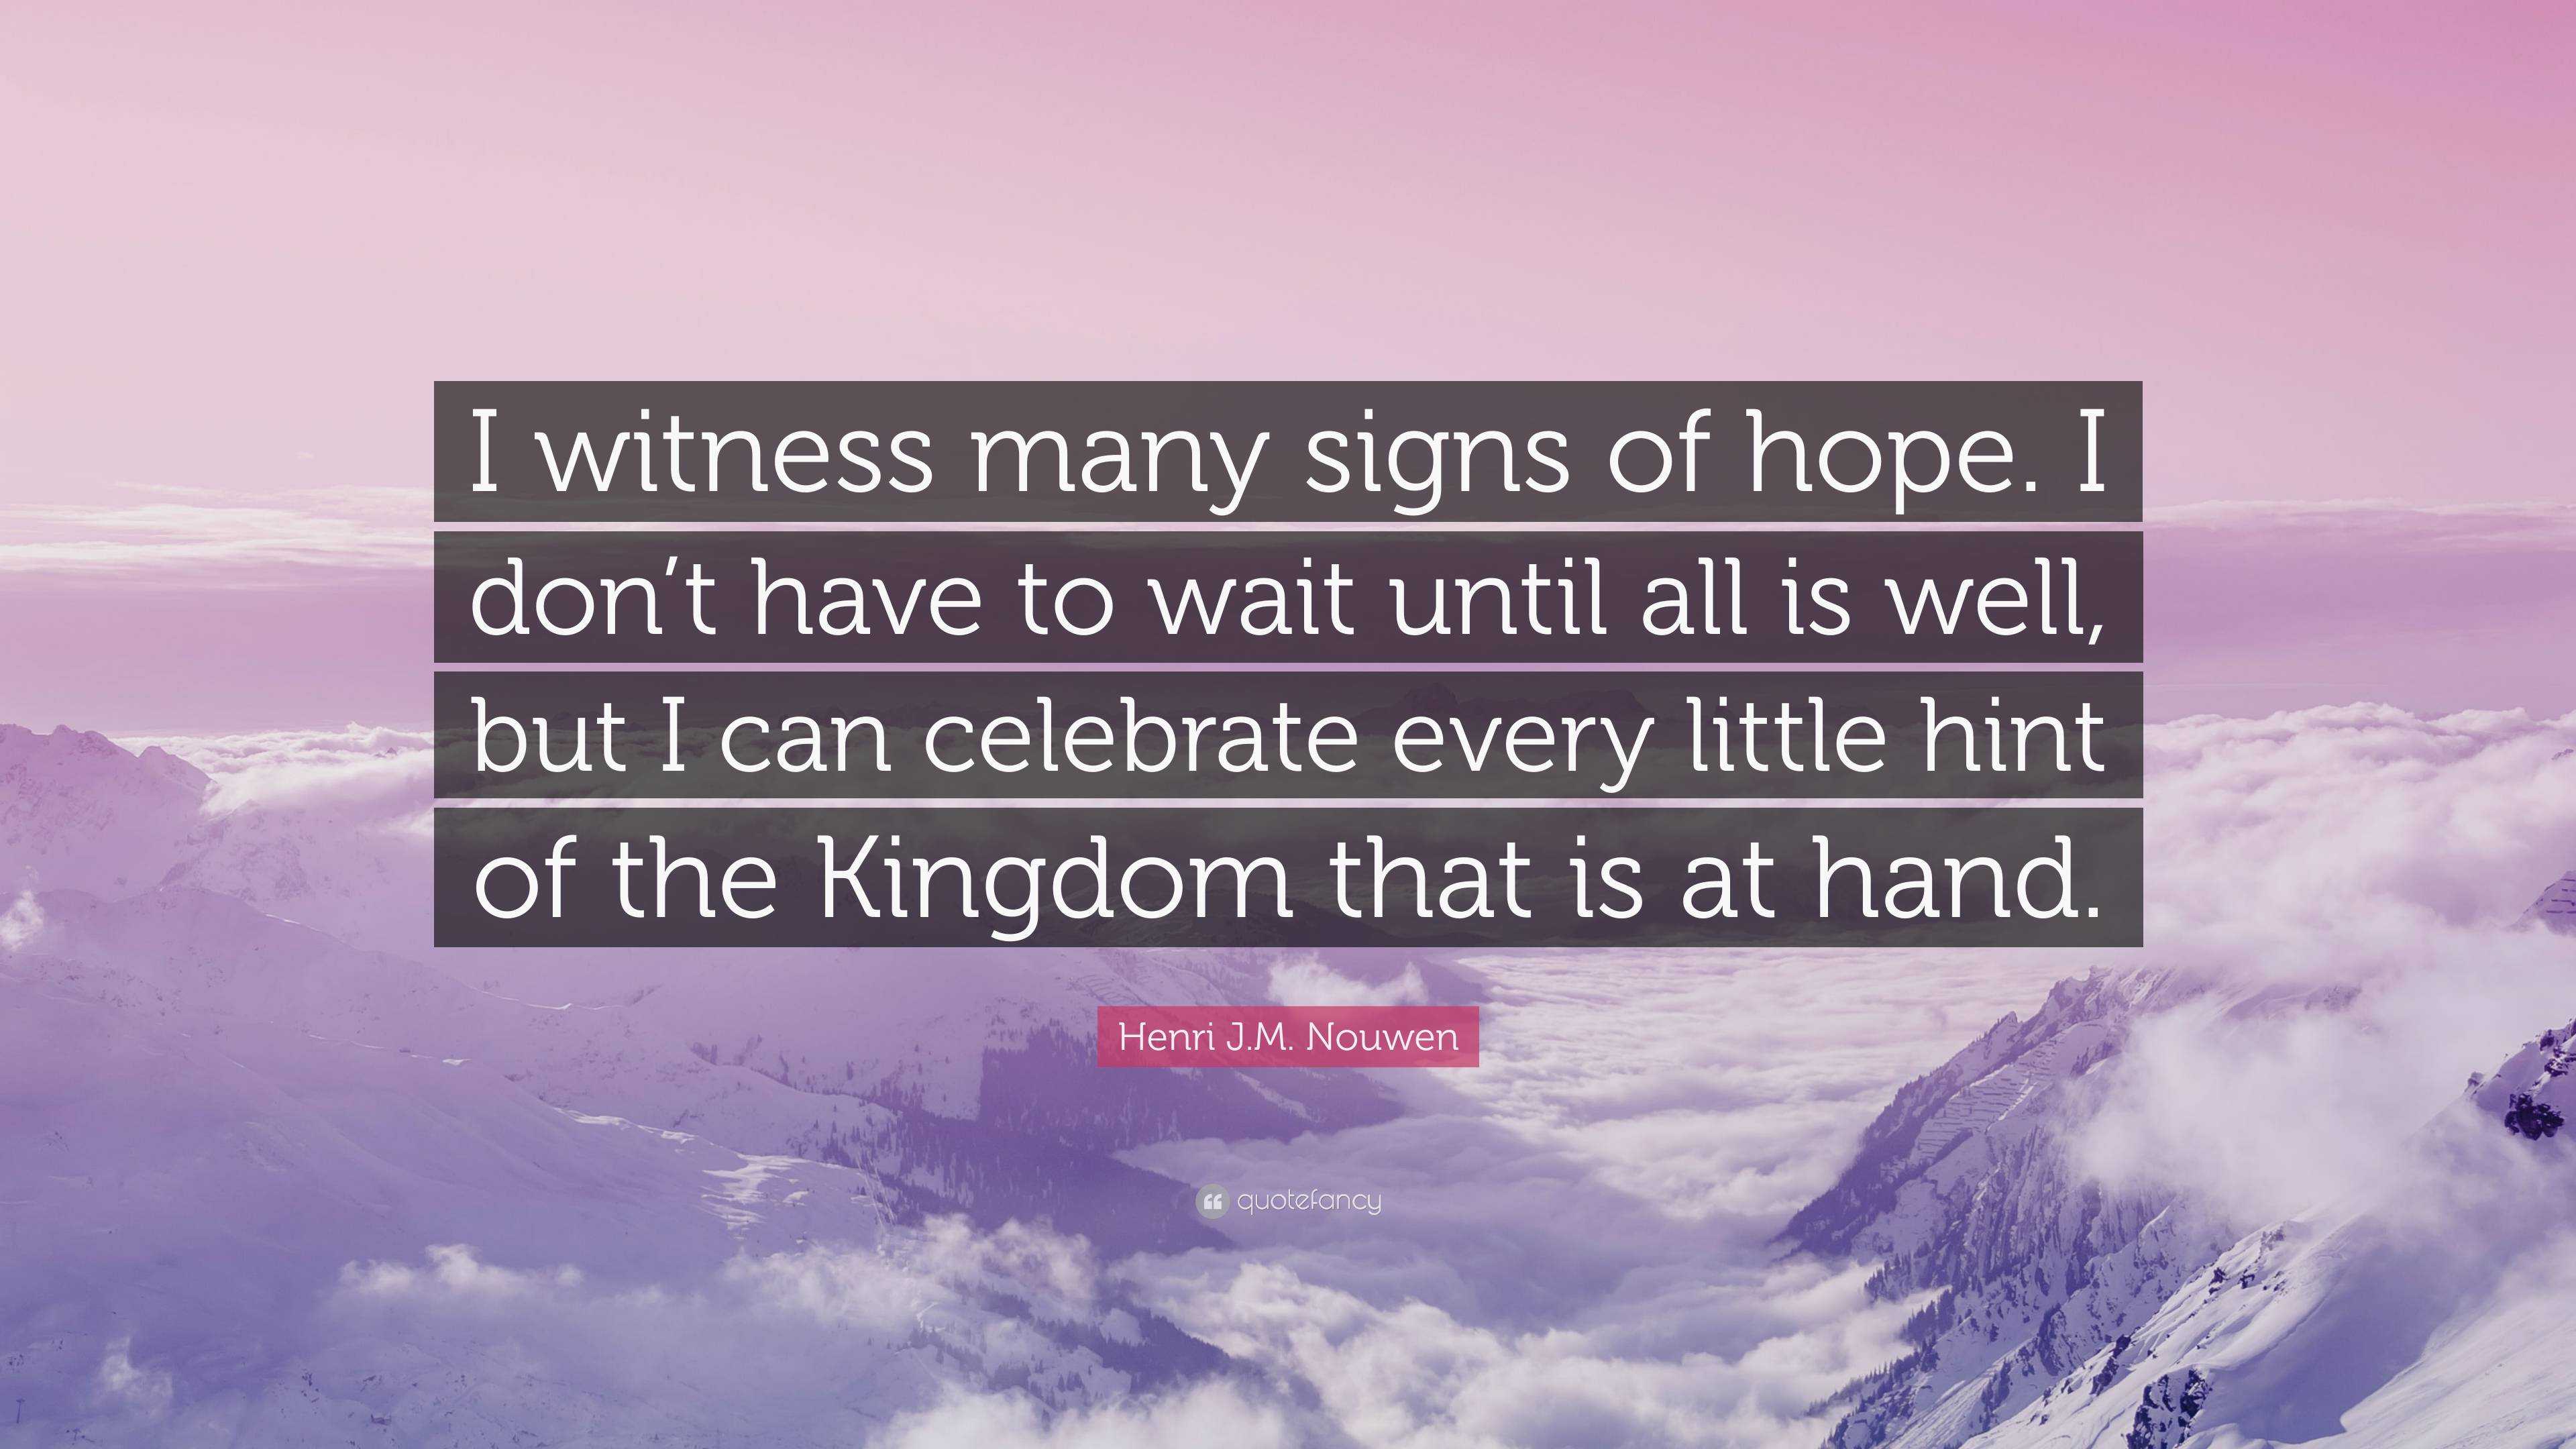 henry nouwen definition of optimism and hope